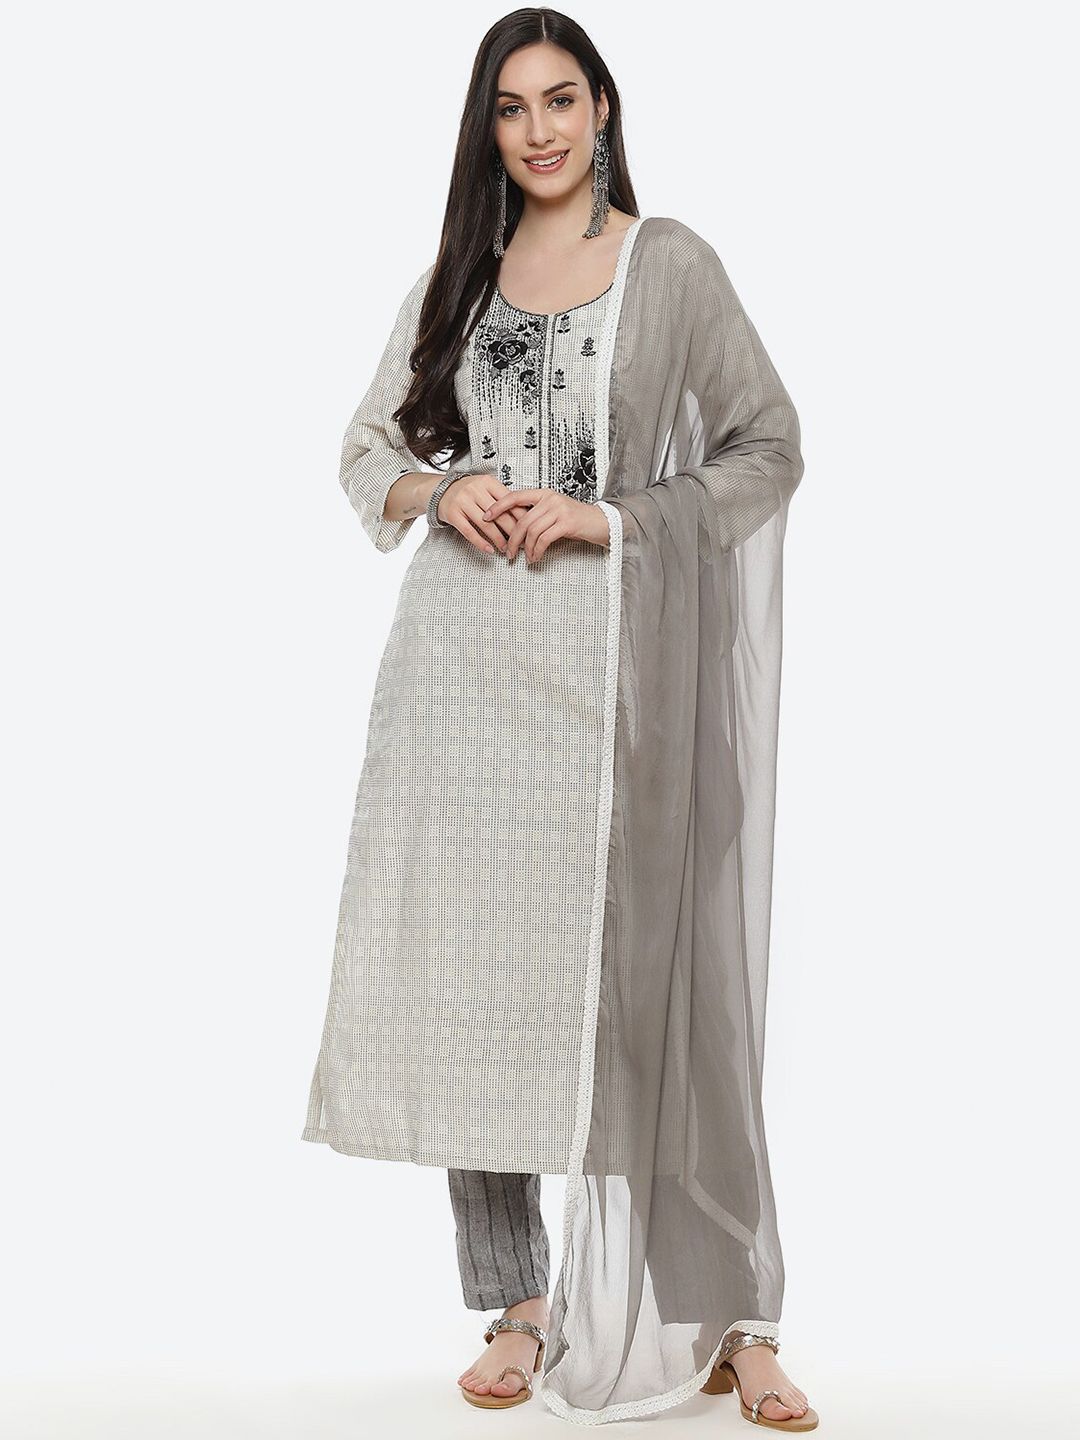 Biba White & Grey Embroidered Pure Cotton Unstitched Dress Material Price in India